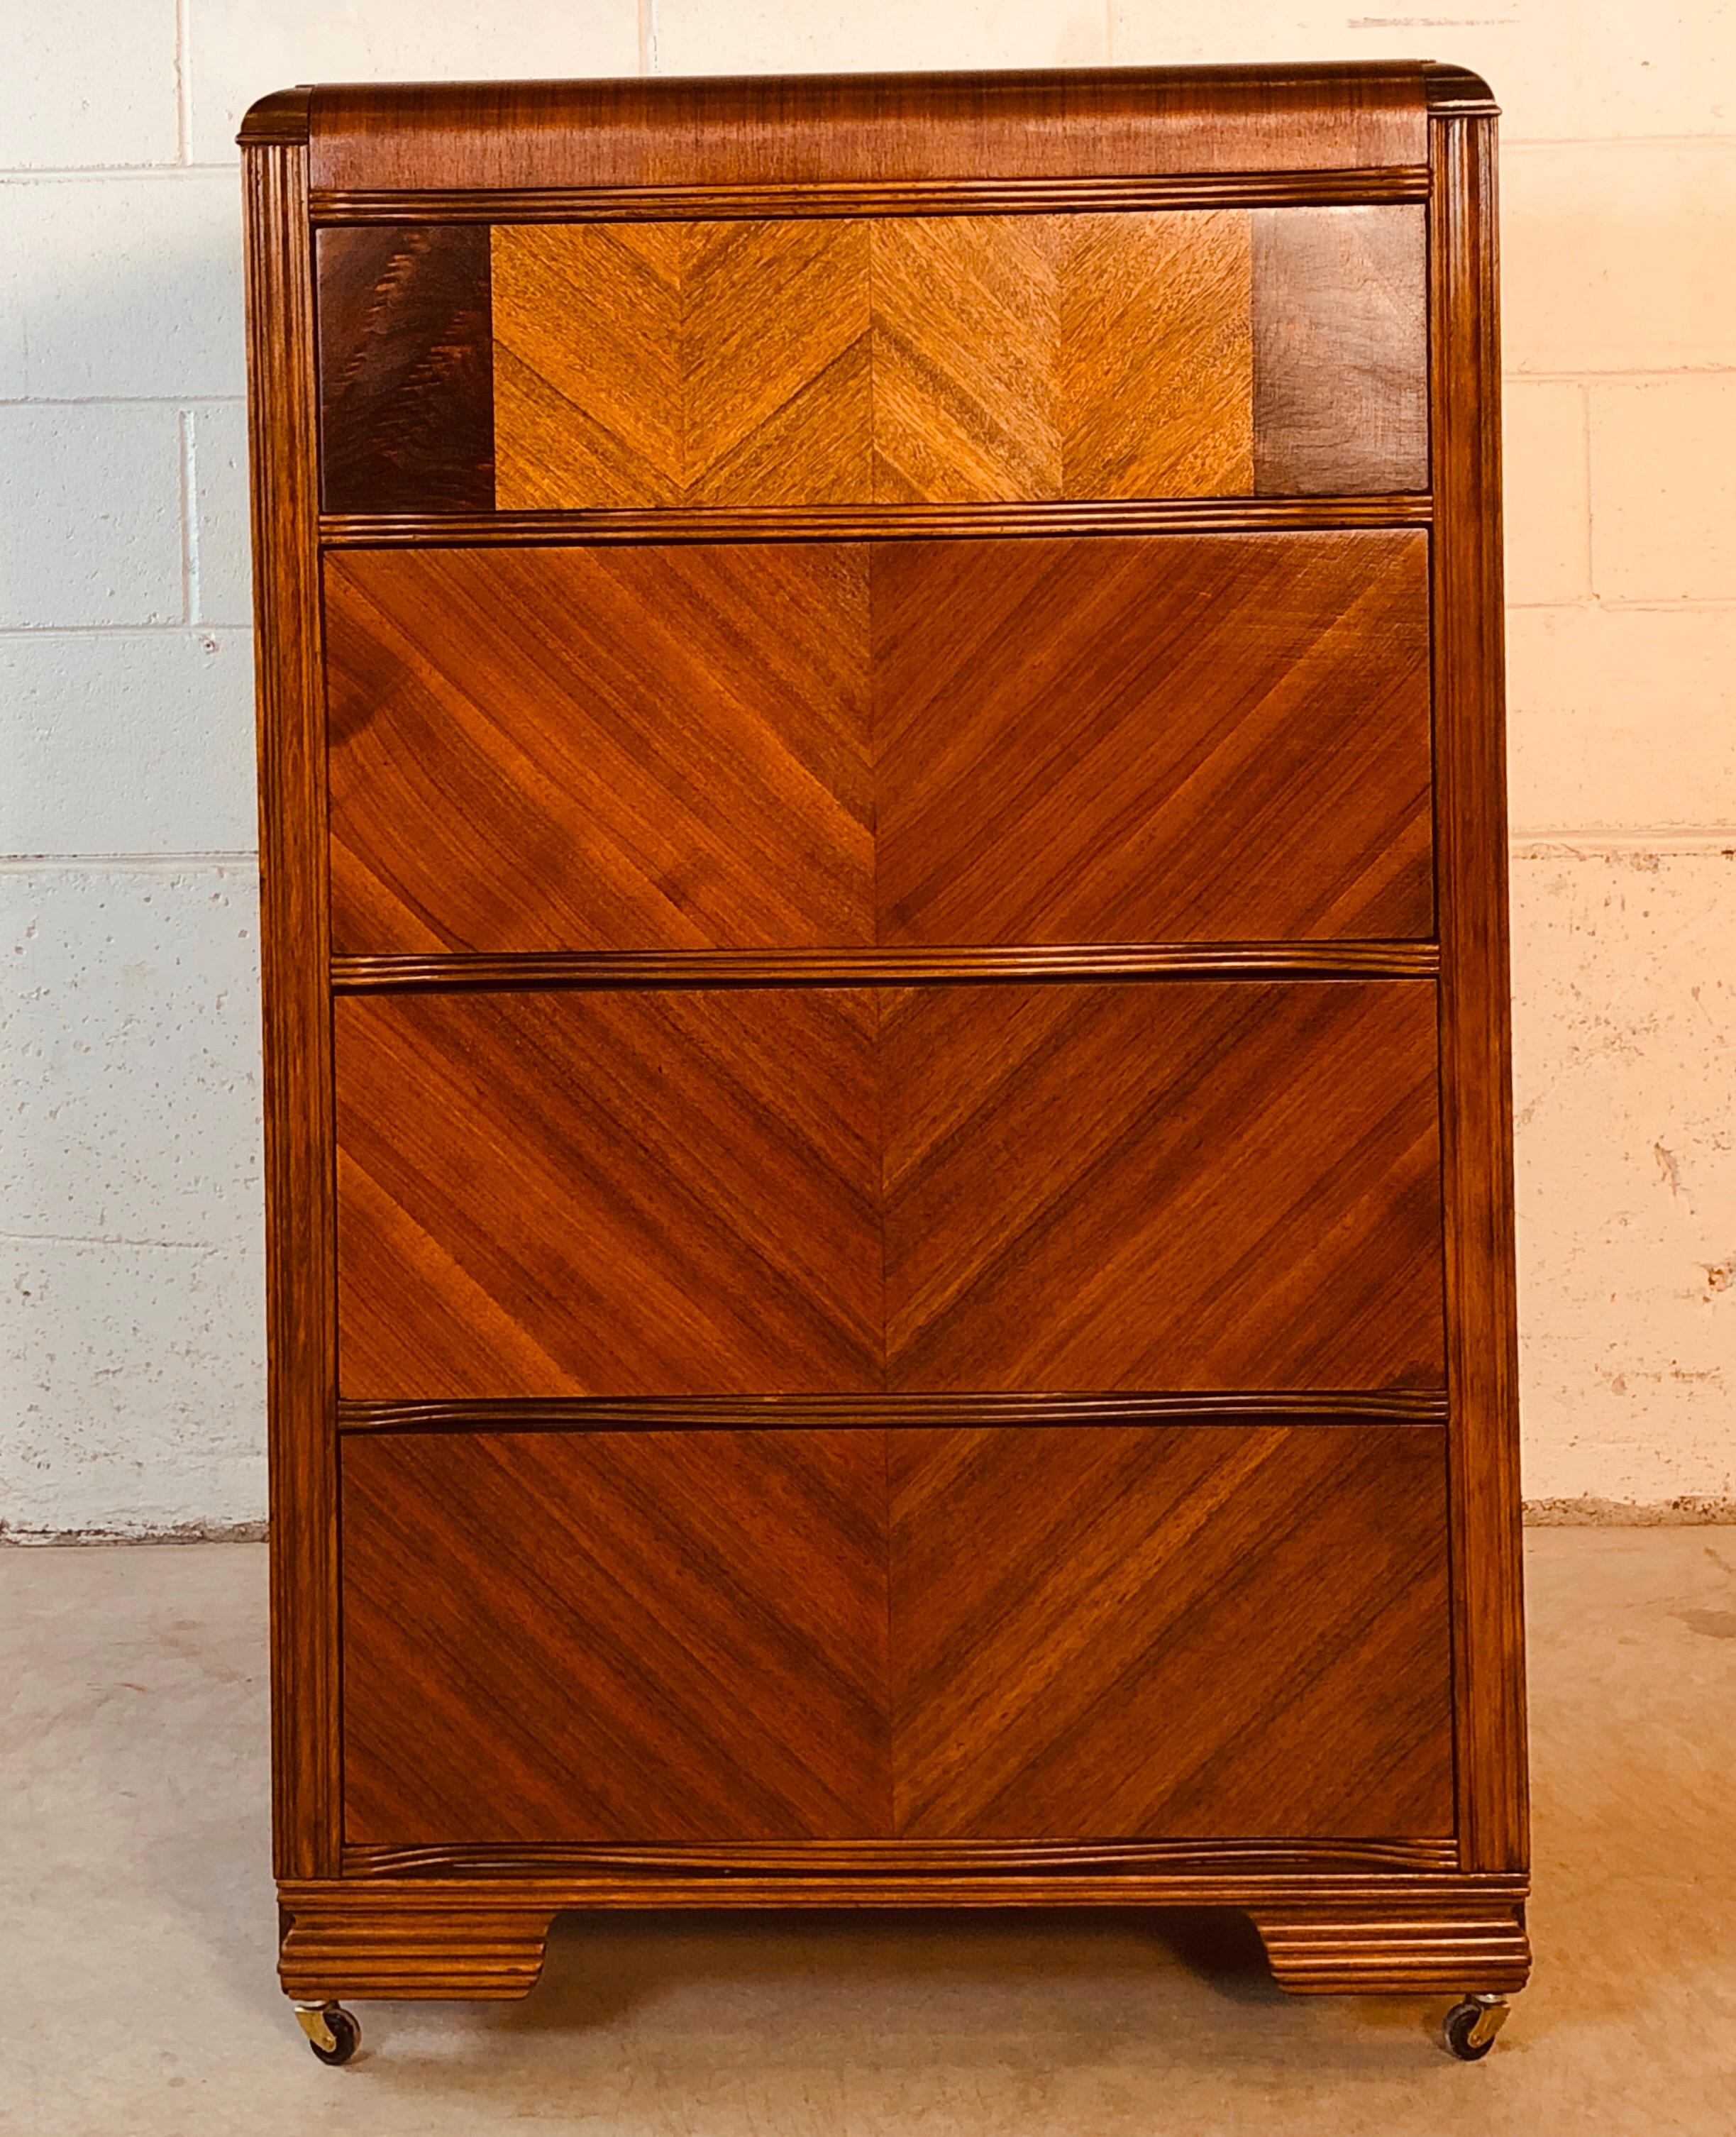 Vintage Art Deco waterfall style matchbook veneer tall four drawer dresser. The dresser has deep drawers for storage and is on castors. Newly refinished and in excellent condition. No marks.